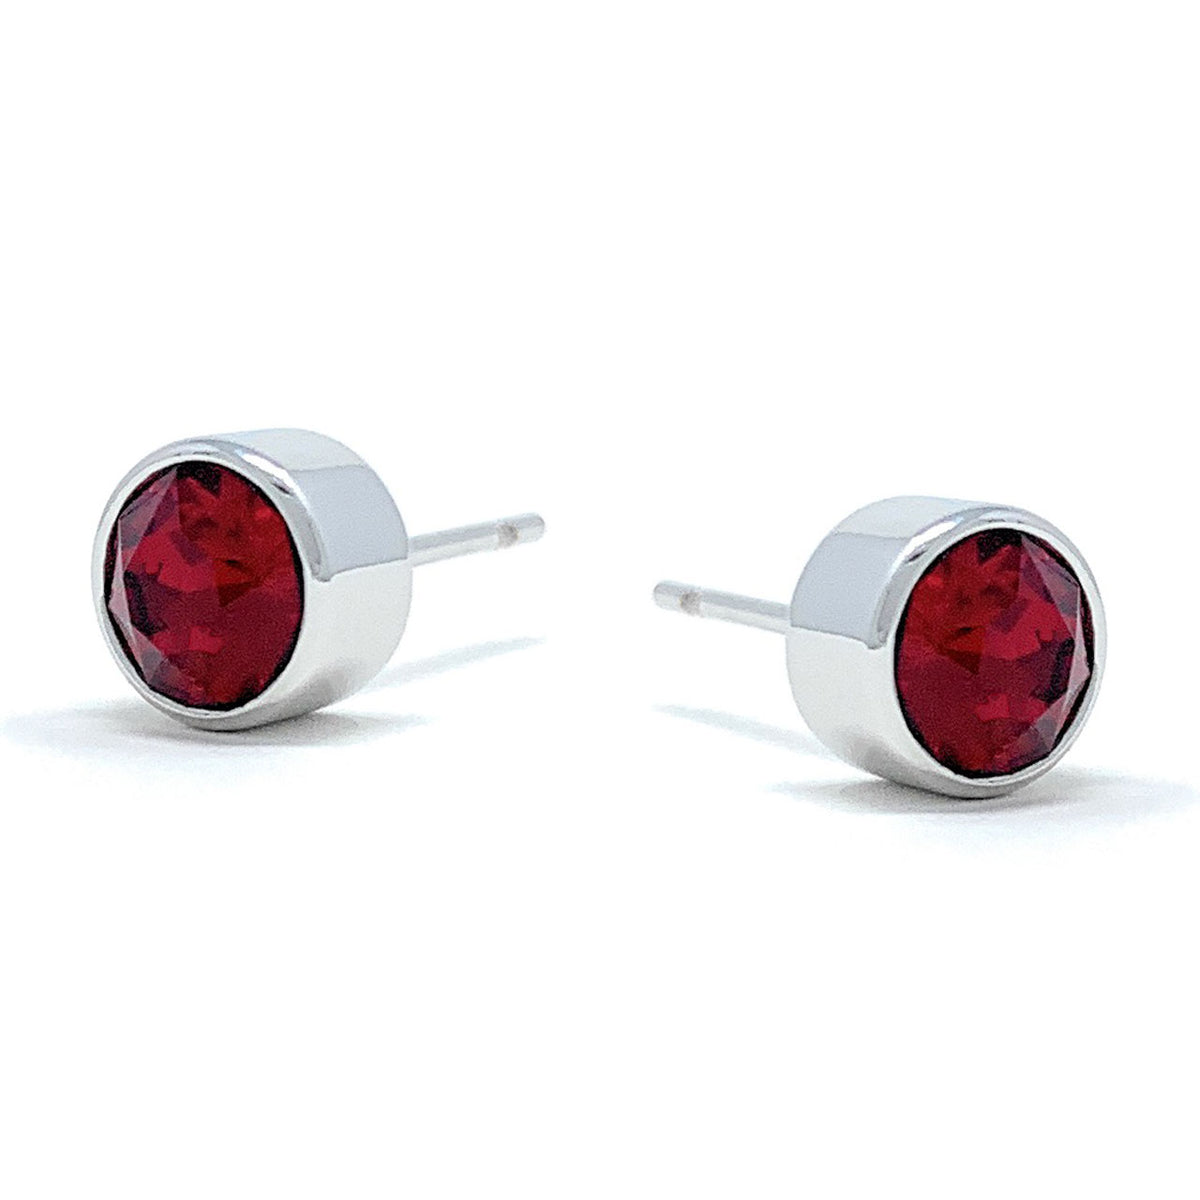 Harley Small Stud Earrings with Red Siam Round Crystals from Swarovski Silver Toned Rhodium Plated - Ed Heart